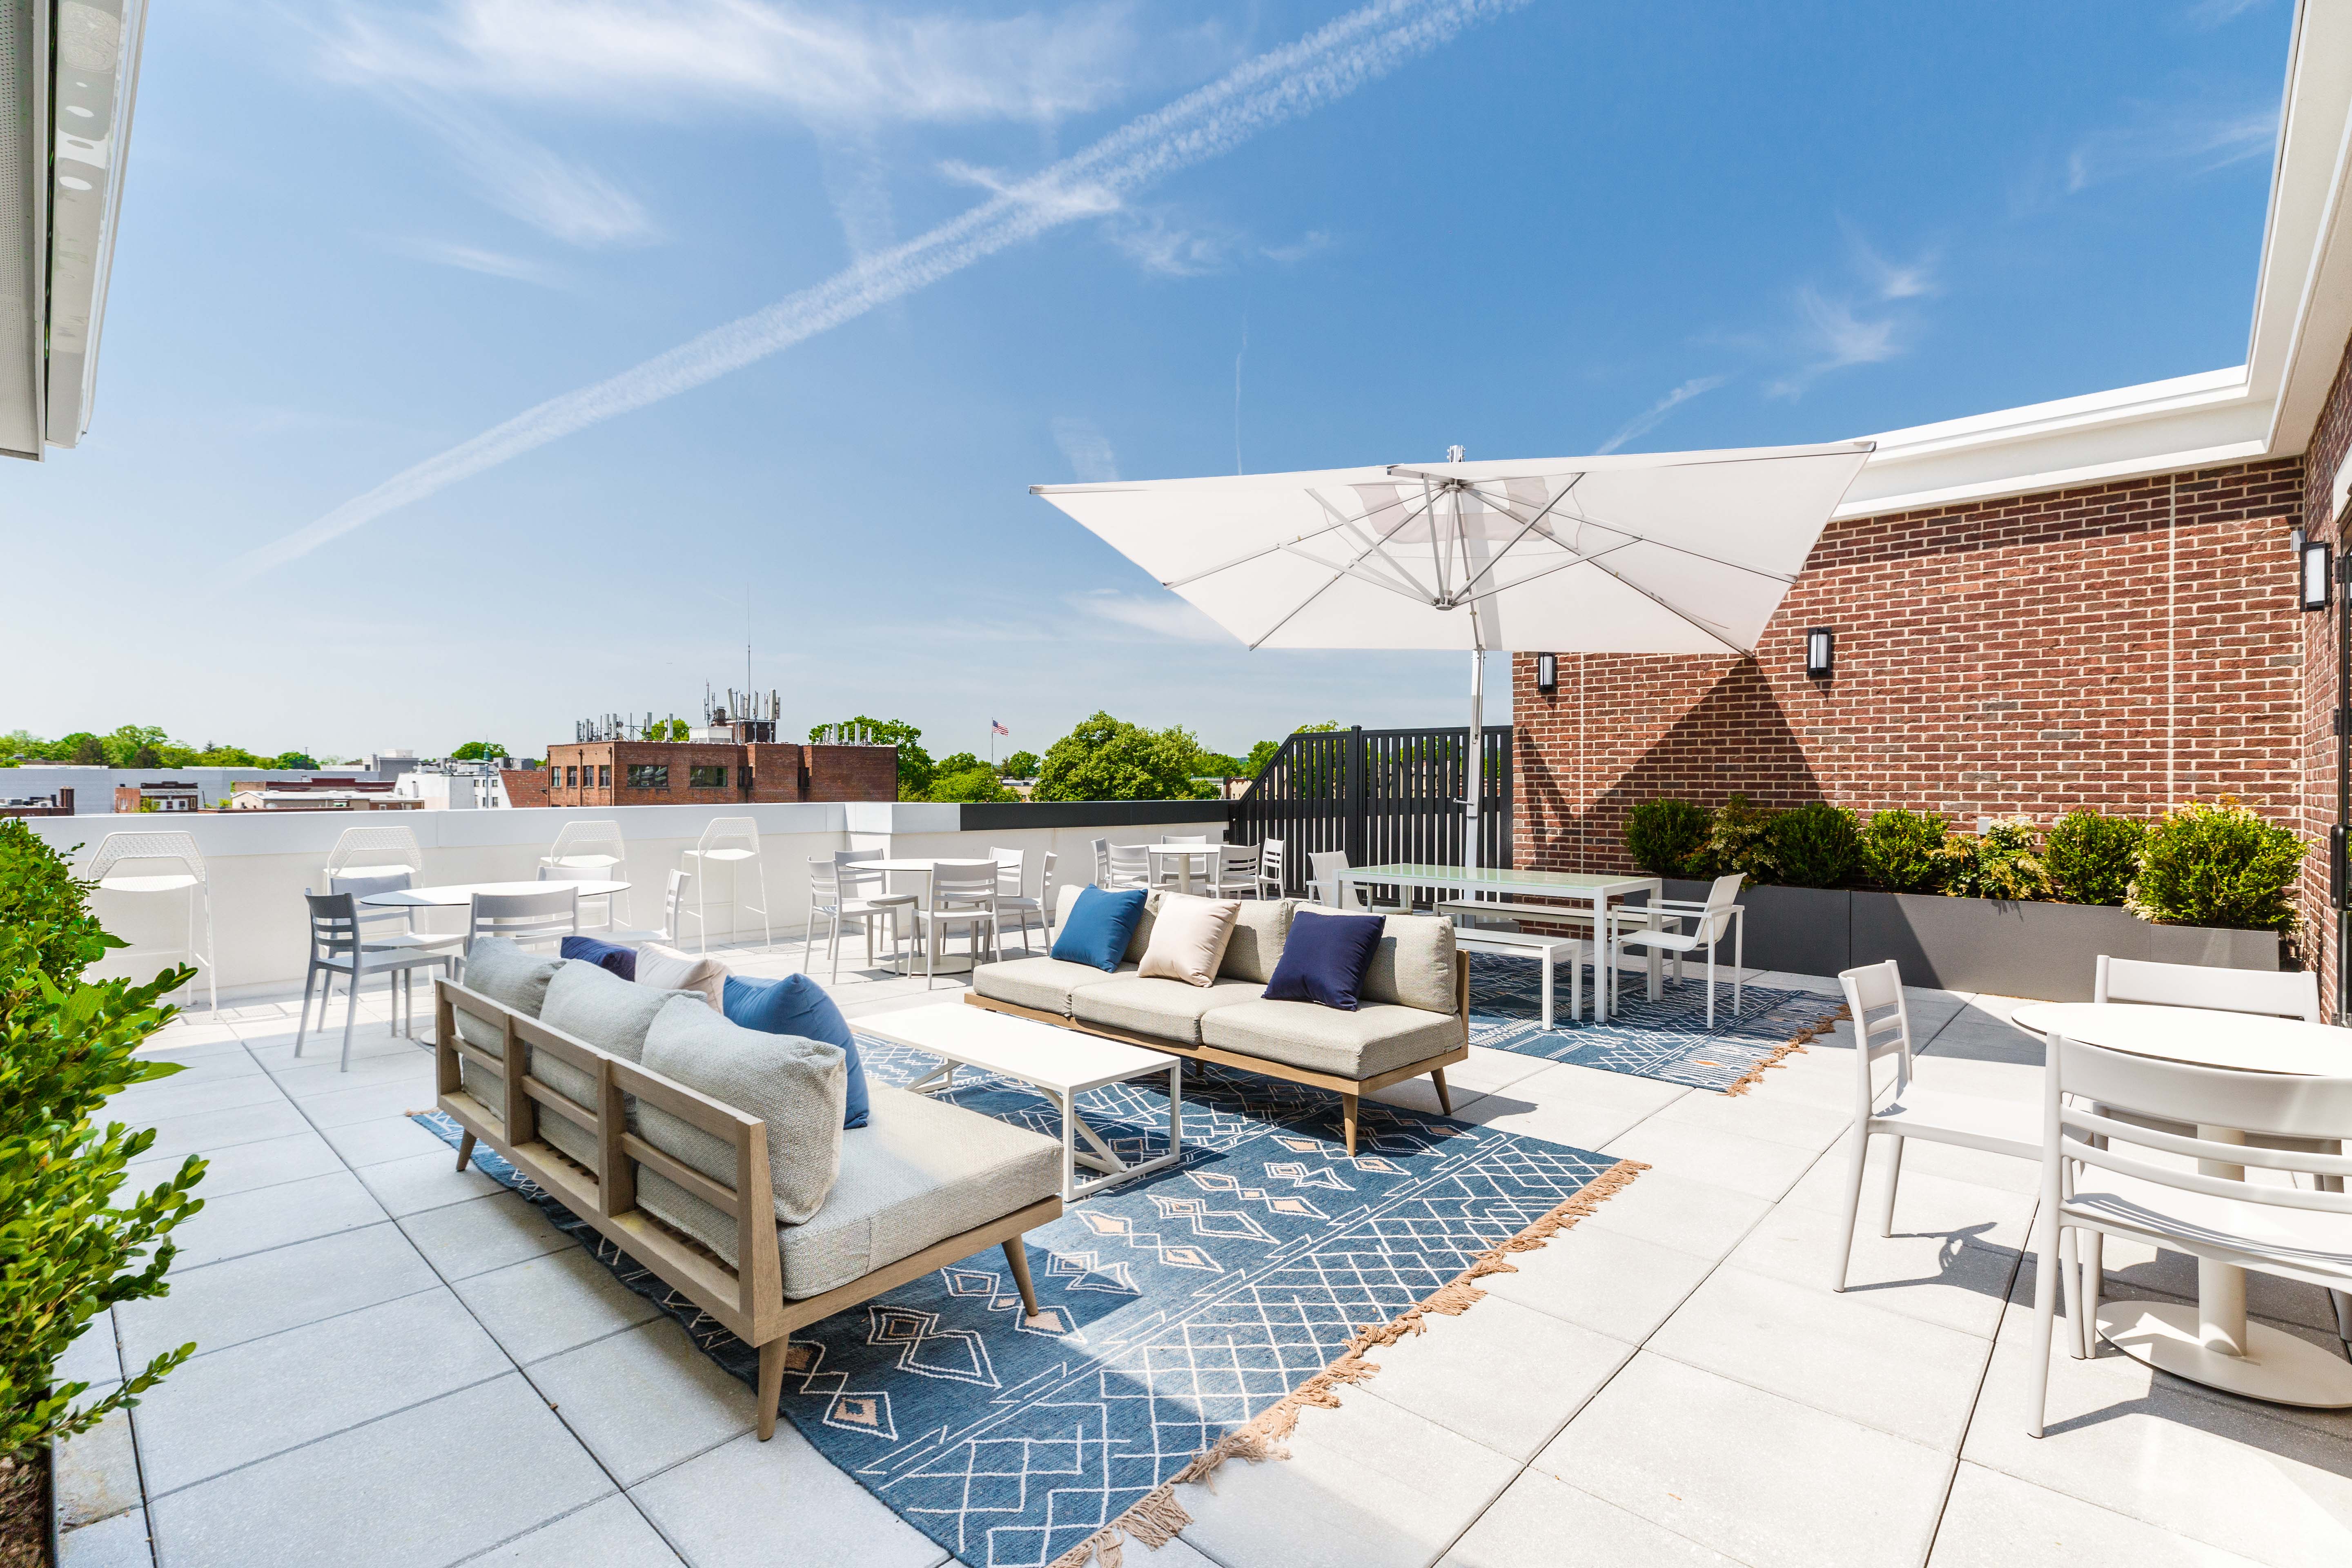 Picture for home-amenities: Rooftop Lounge